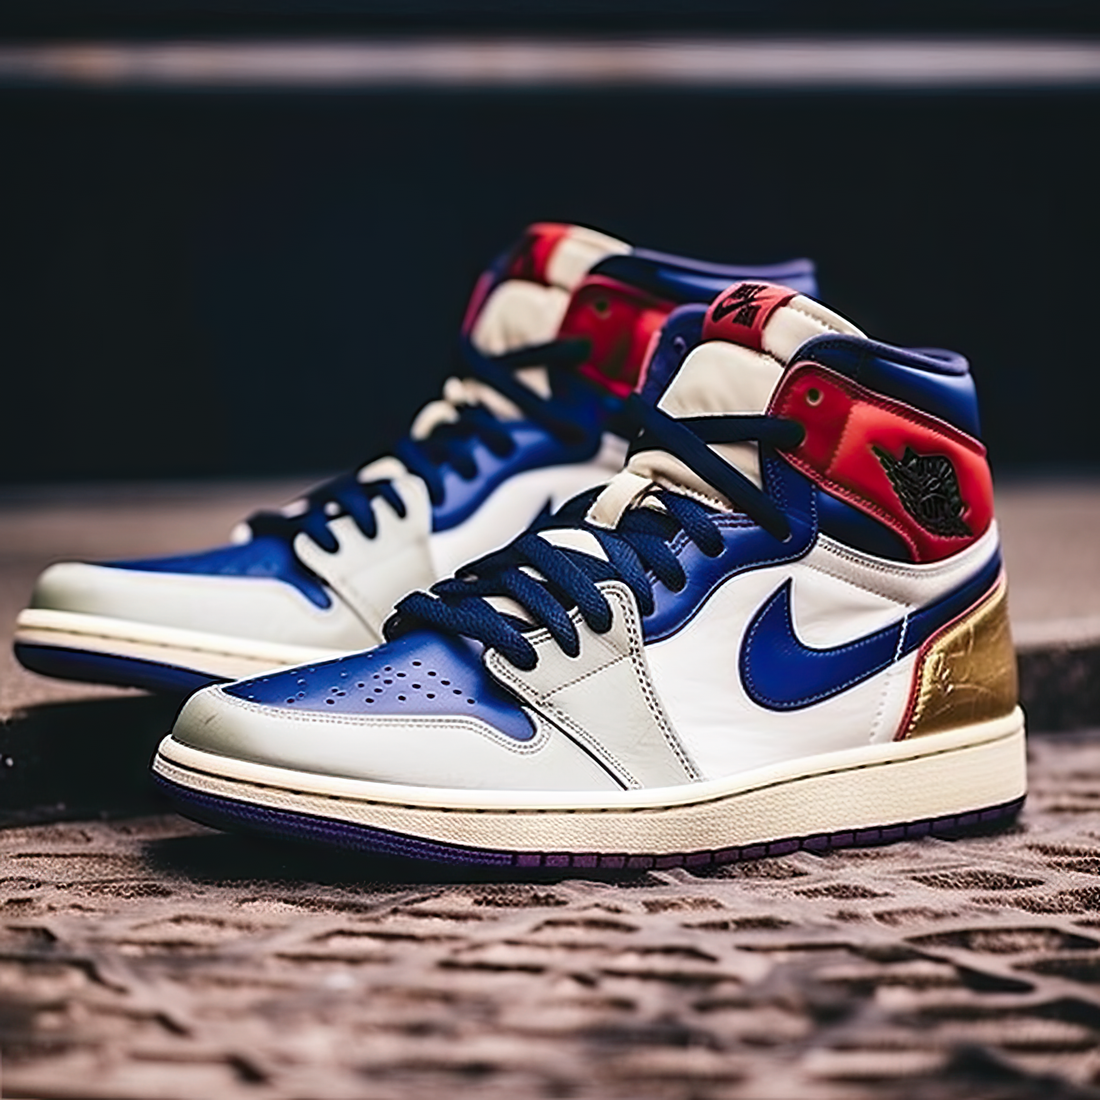 Jordan 1 Colorways That Match MLB Team Colors: Elevate Your Style with 402fitted.com